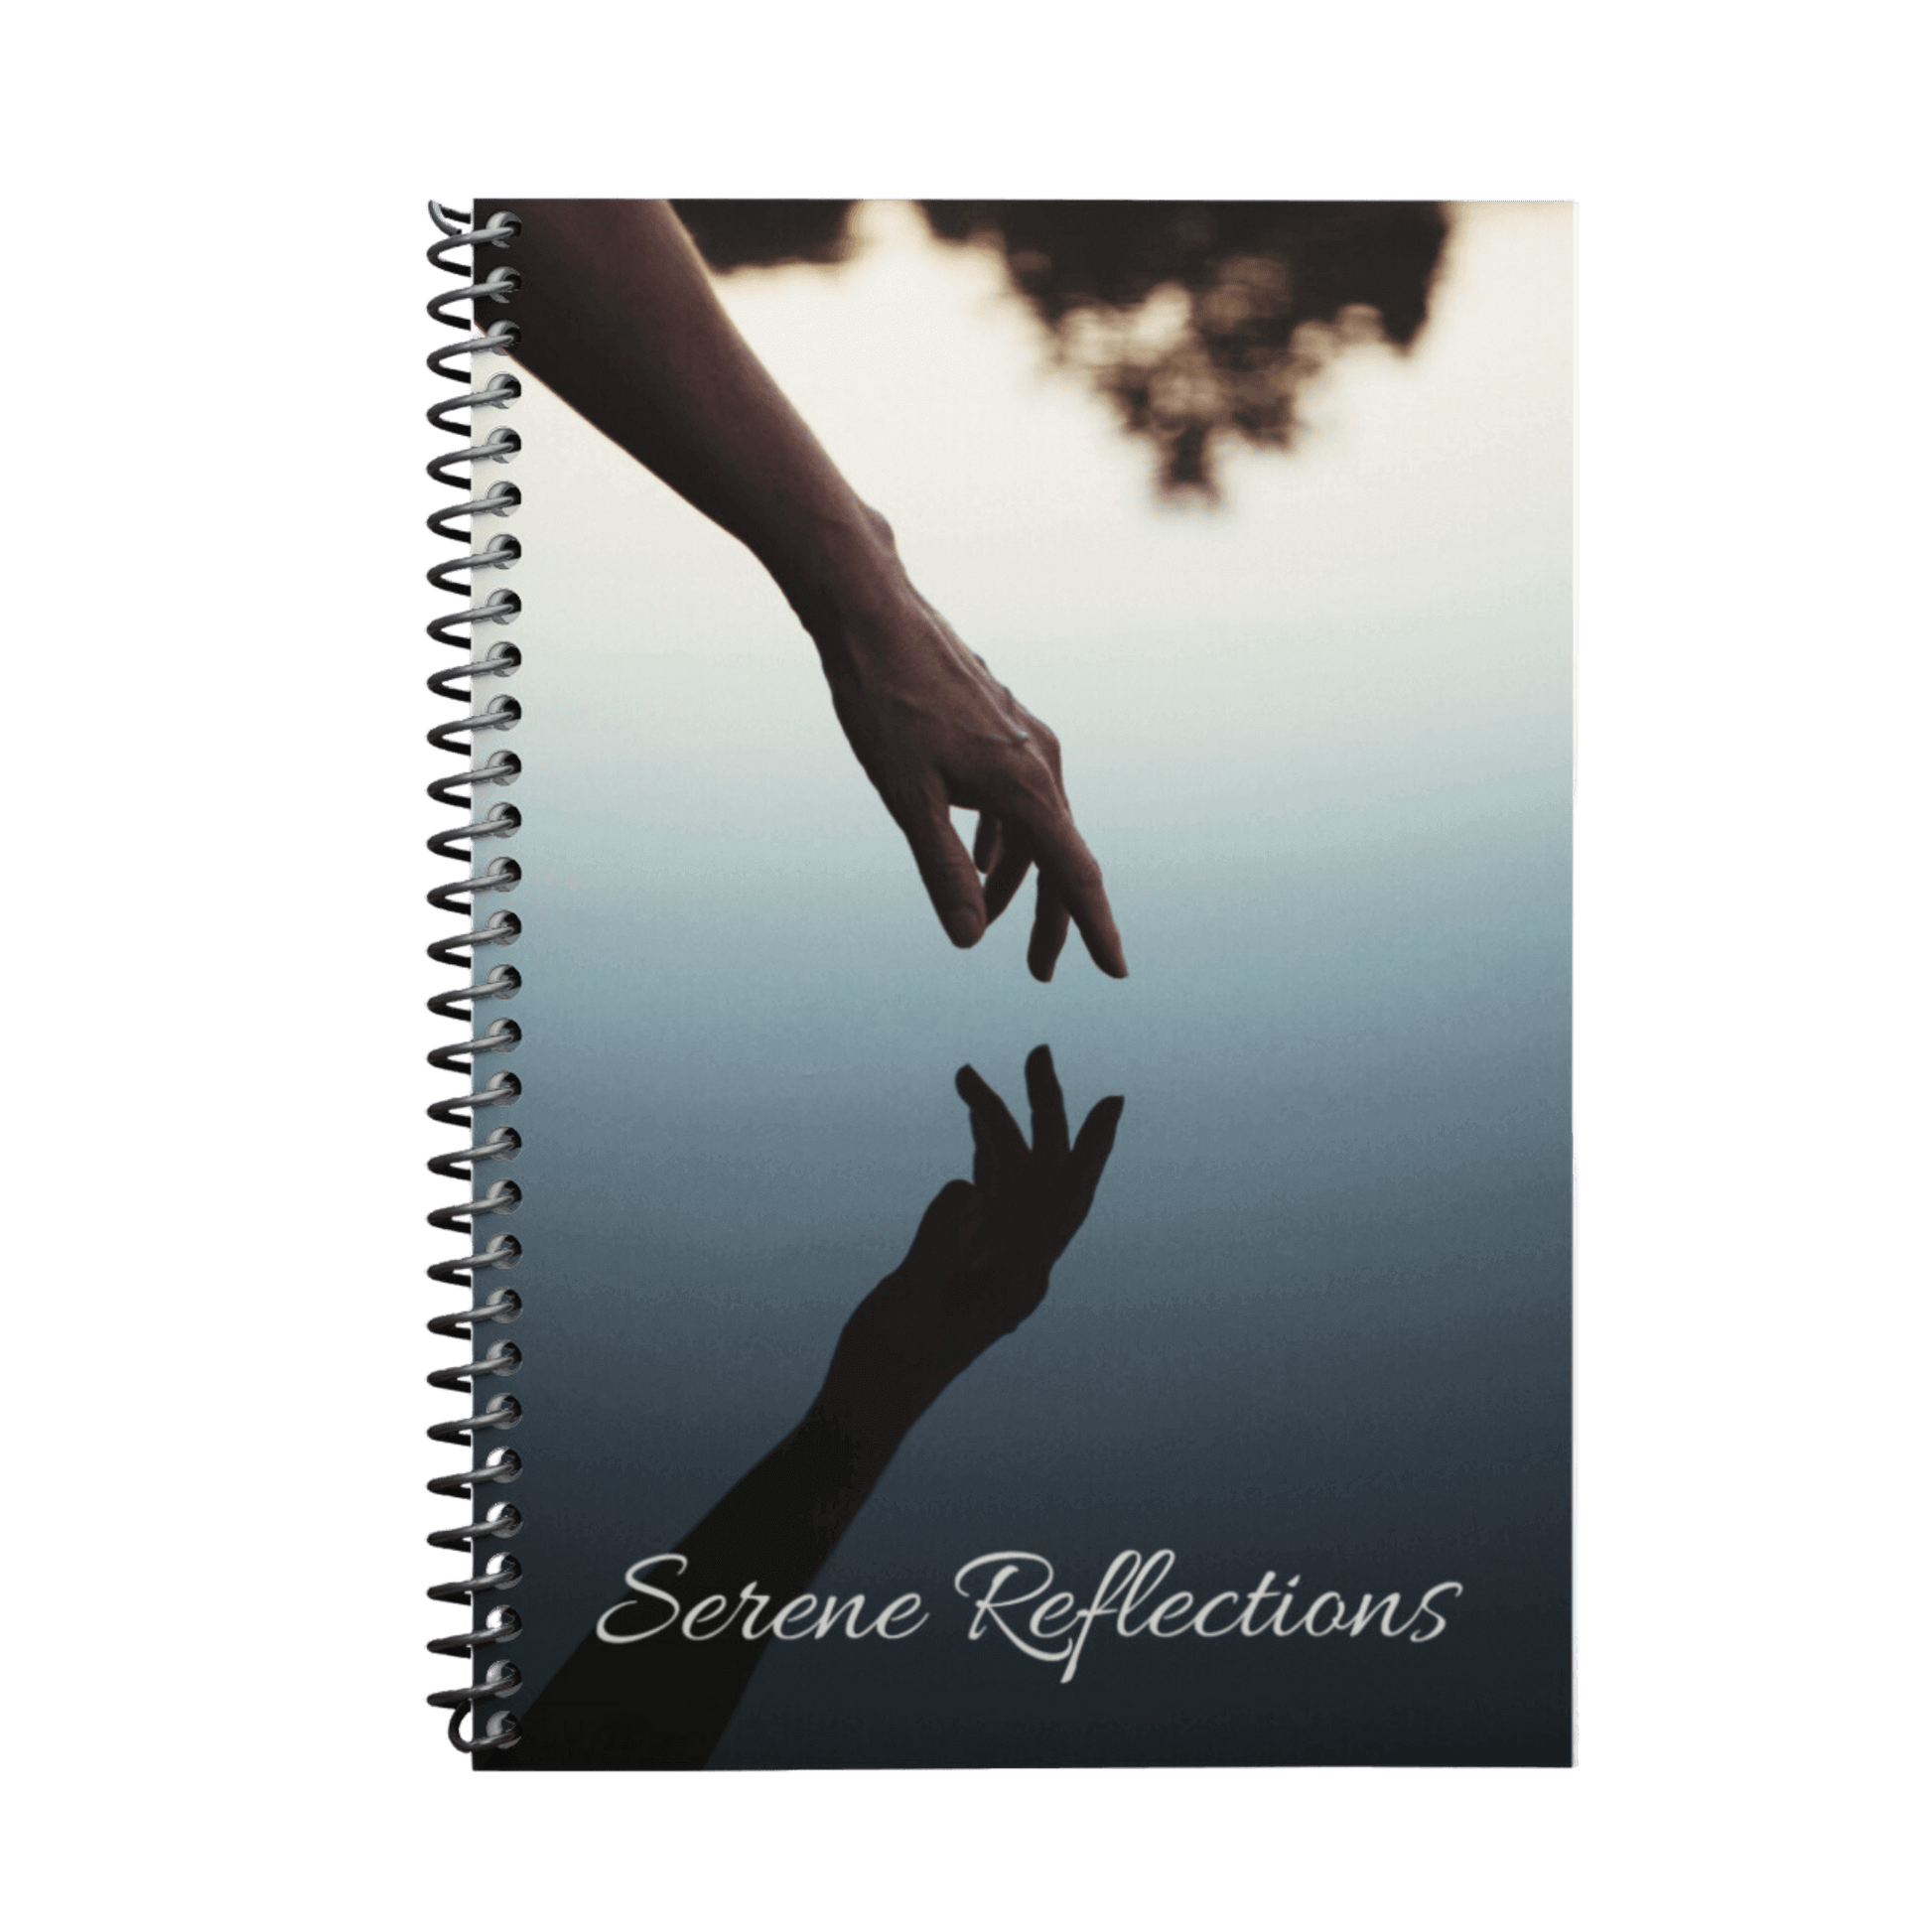 Image of Serene Reflections Journal from Mindful Organizer selling for $22.00.